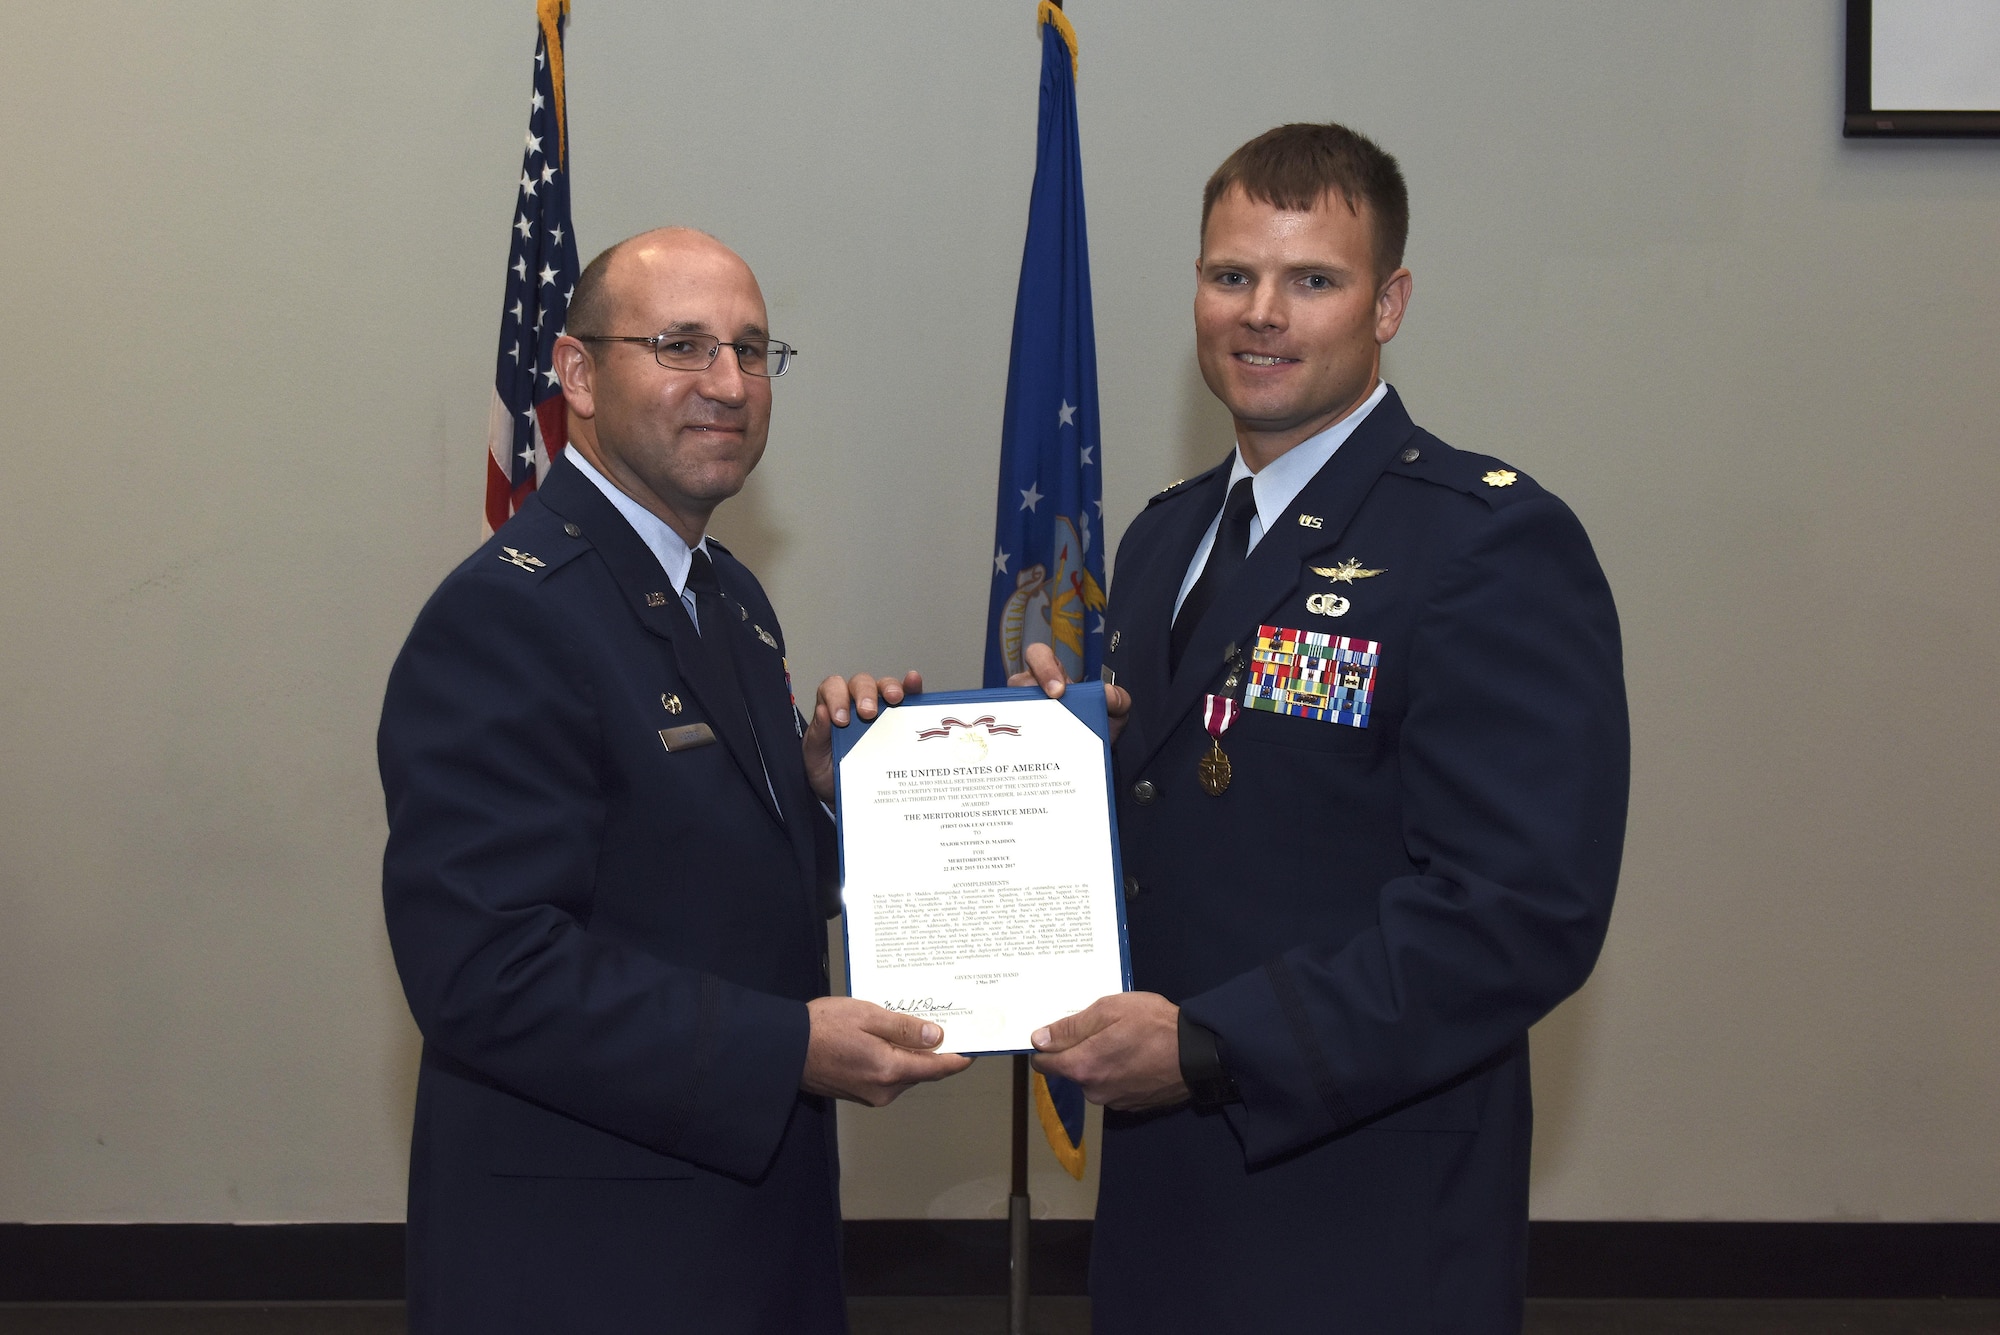 U.S. Air Force Col. Christopher Harris, 17th Mission Support Group commander, presents a Meritorious Service certificate to Maj. Stephen Maddox, 17th Communications Squadron commander, during the 17th CS change of command ceremony at the Event Center on Goodfellow Air Force Base, Texas, May 31, 2017. Maddox received the medal for outstanding service to his unit by providing new equipment and deployment opportunities for Airmen despite low manning.